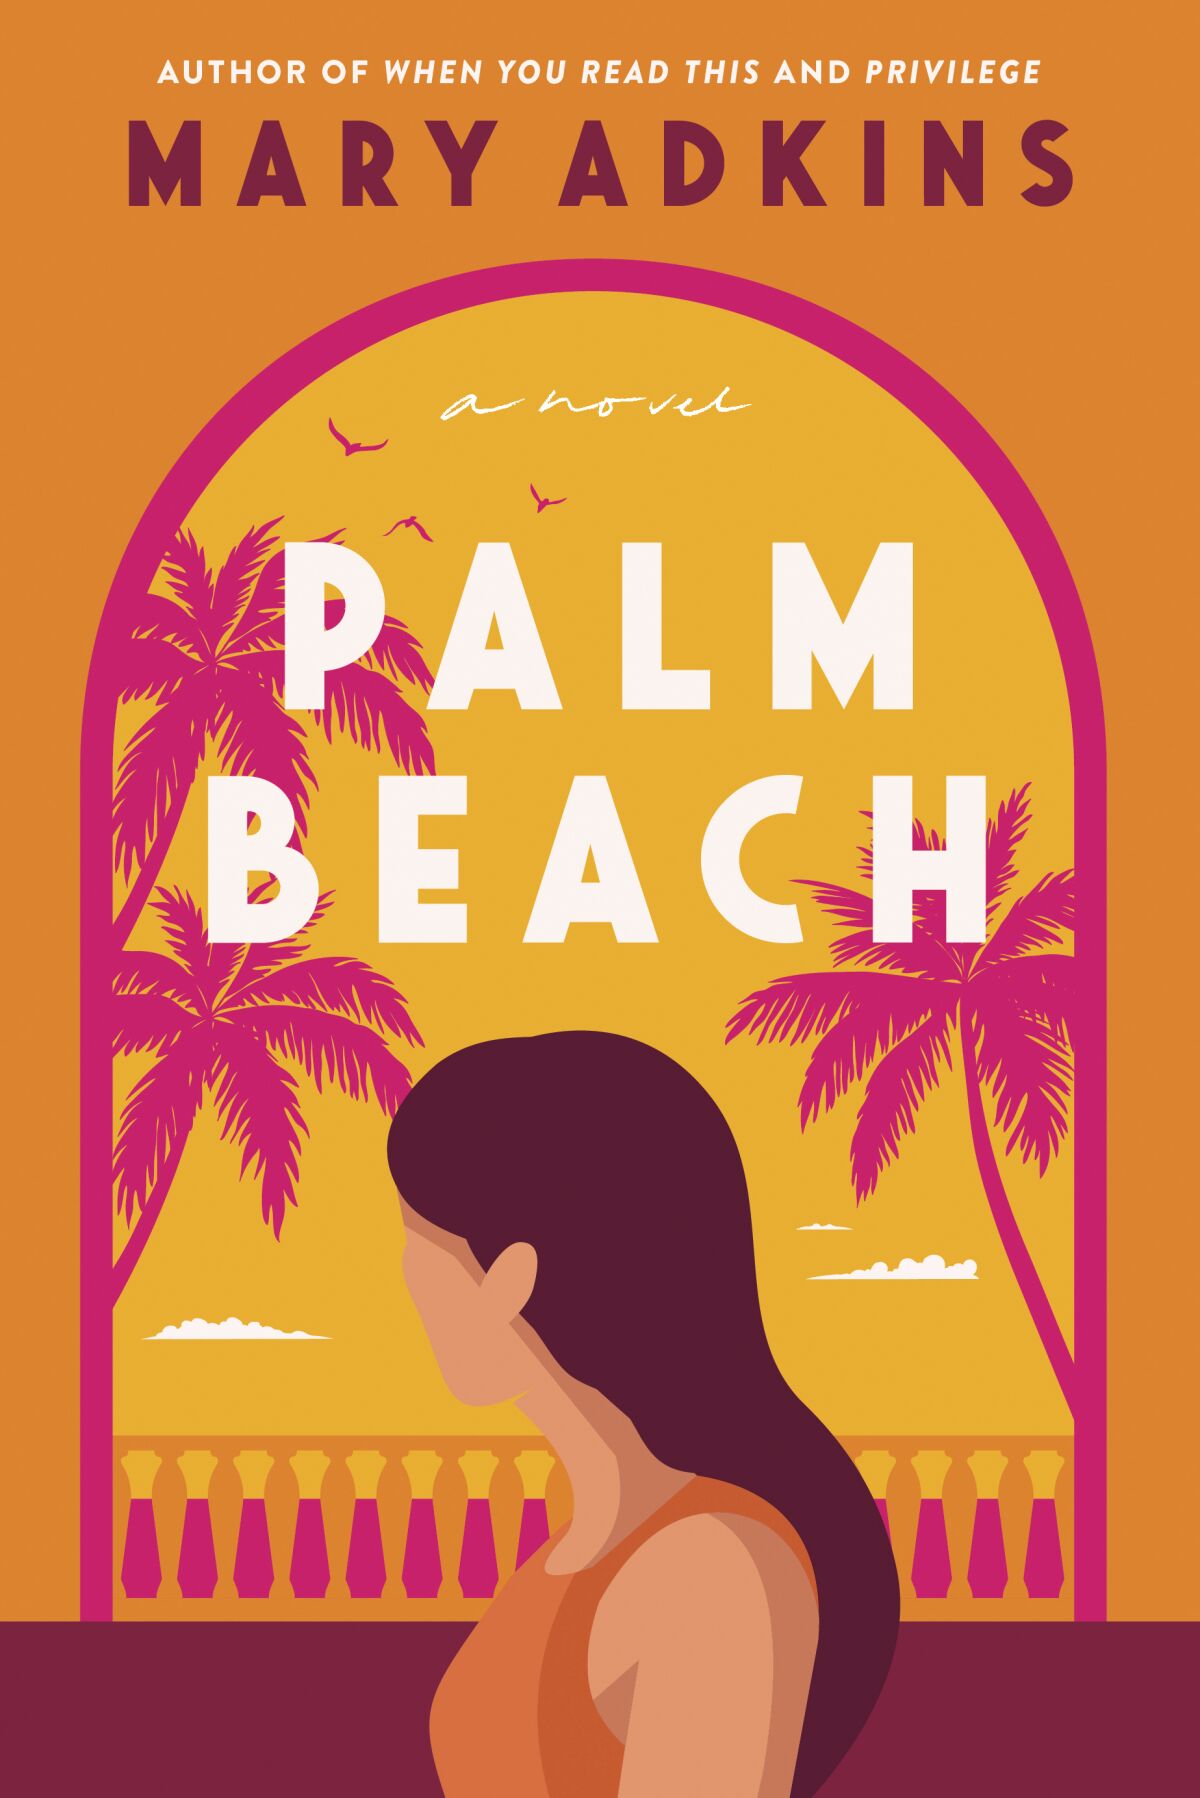 This cover image released by Harper shows "Palm Beach" by Mary Adkins. (Harper via AP)